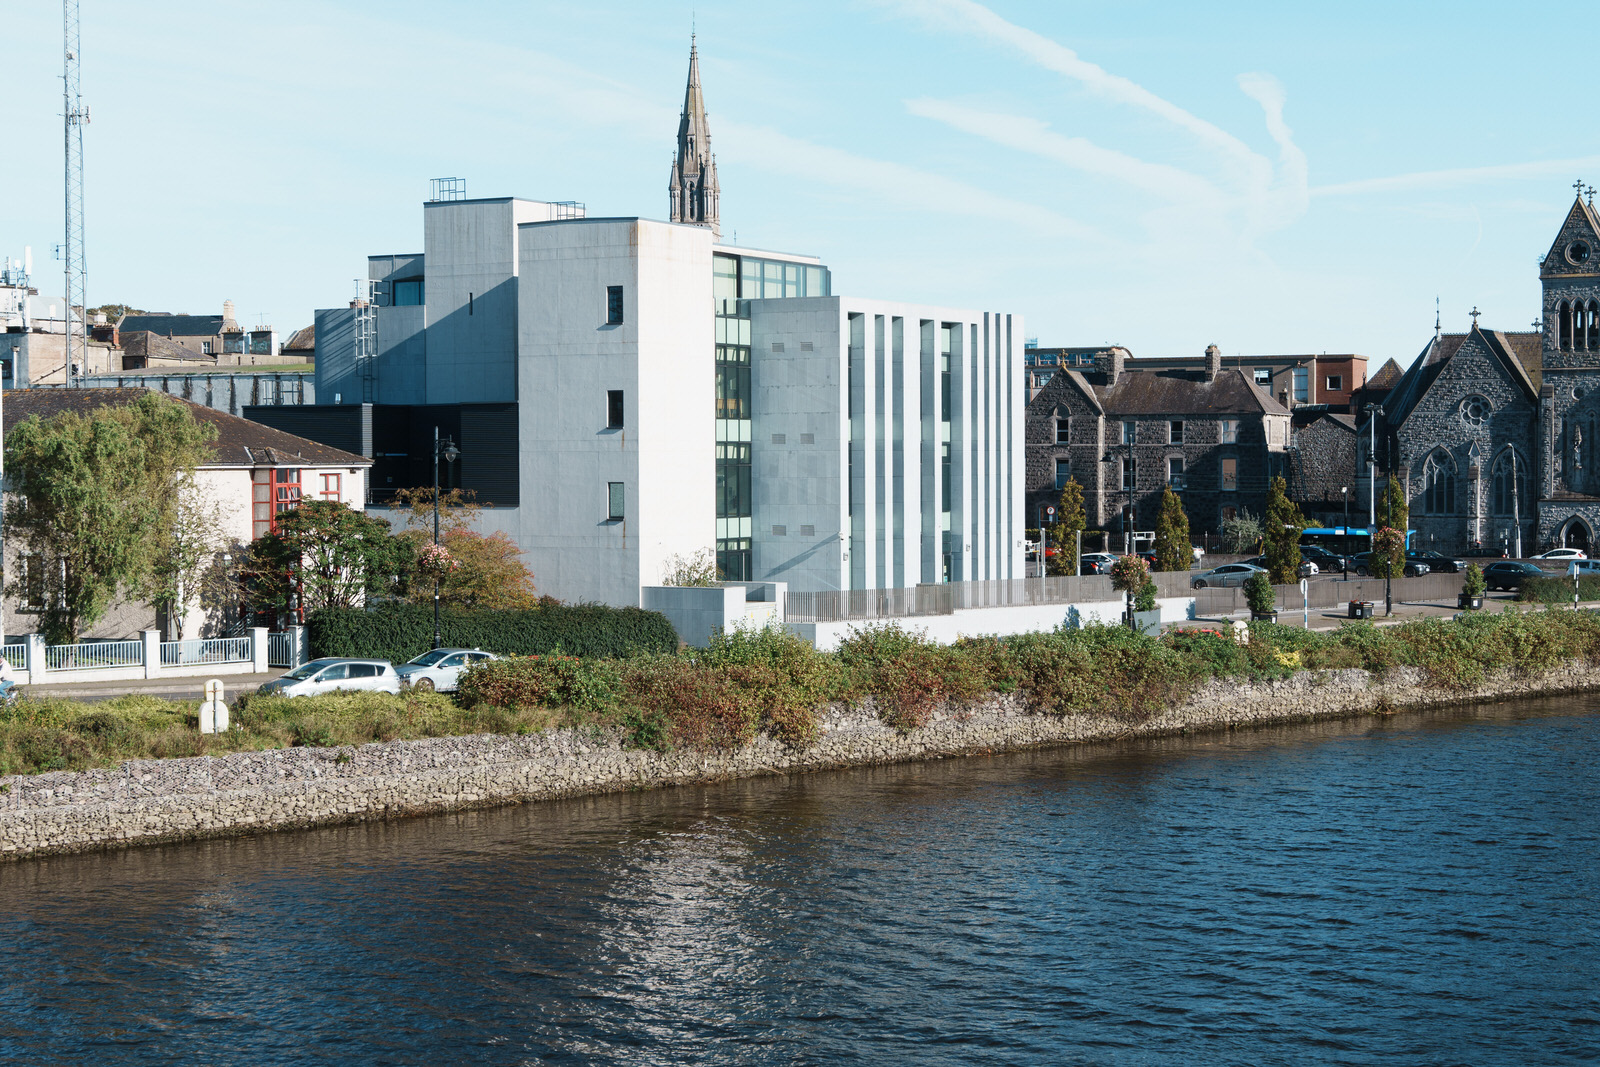 GARDA STATION AND NEW COURTHOUSE [IN CONTEXT WITHIN THE HISTORIC TOWN OF DROGHEDA]
001